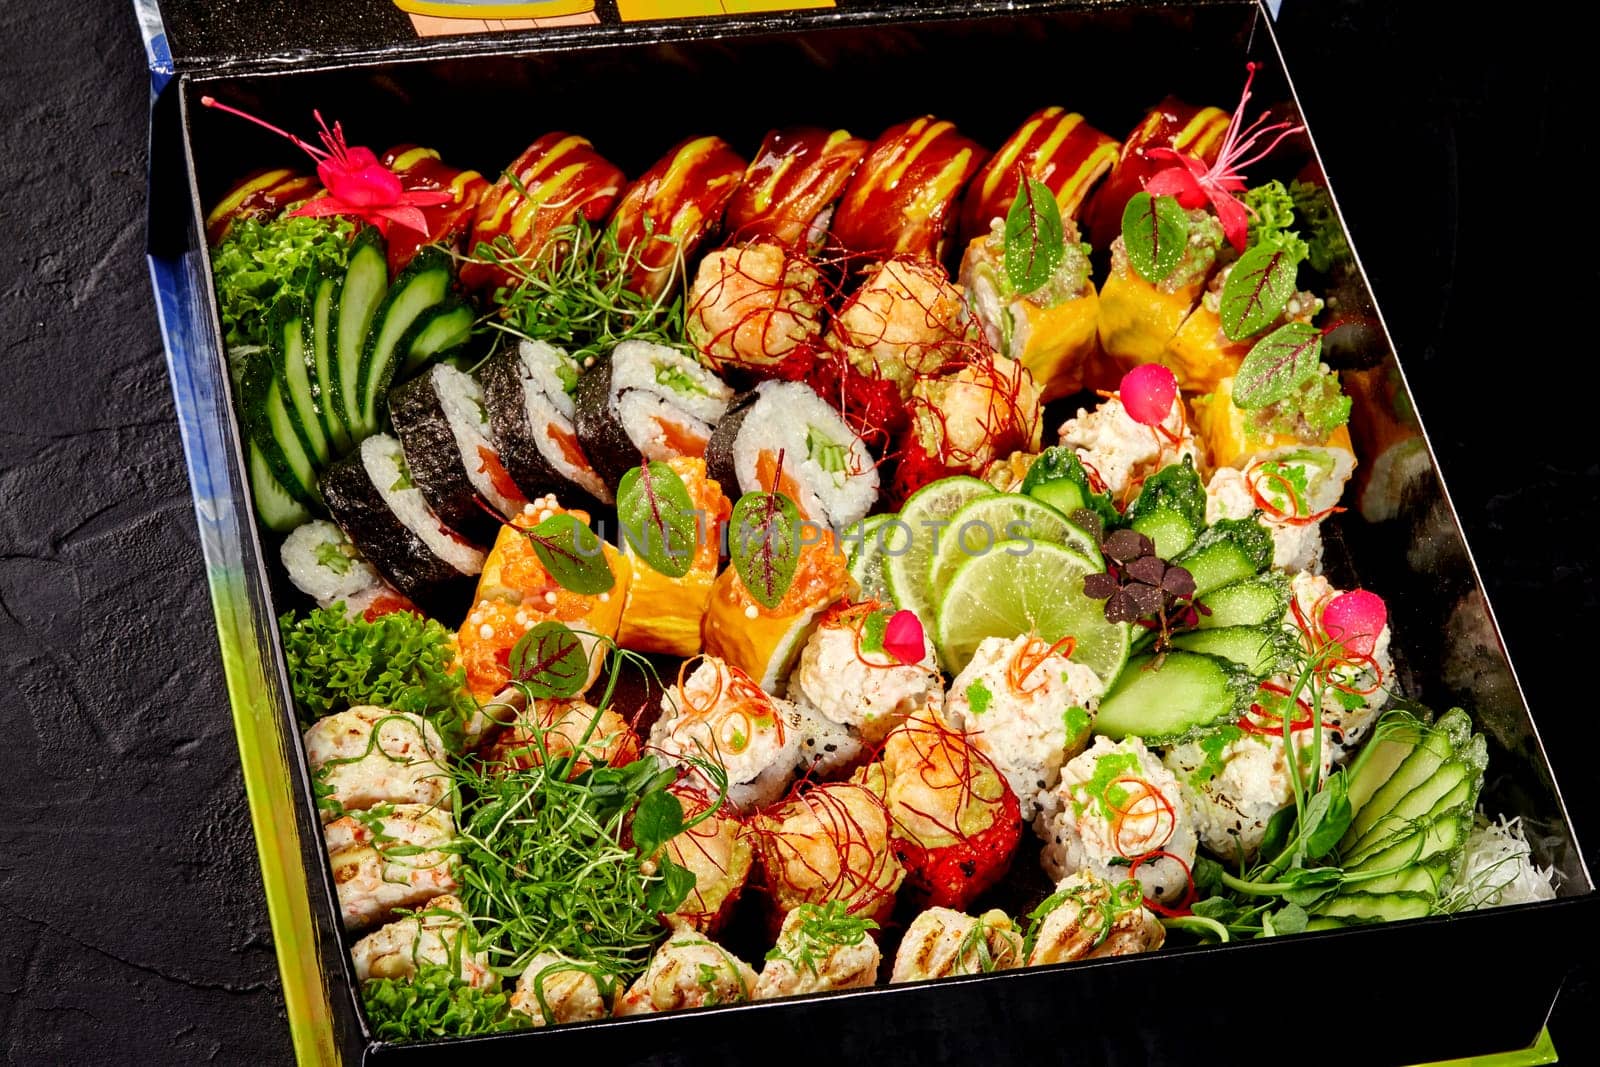 Luxurious set of sushi rolls with various fillings and toppings, artfully arranged in cardboard box garnished with flowers, grated daikon, cucumber and lime on dark background. Takeaway food concept